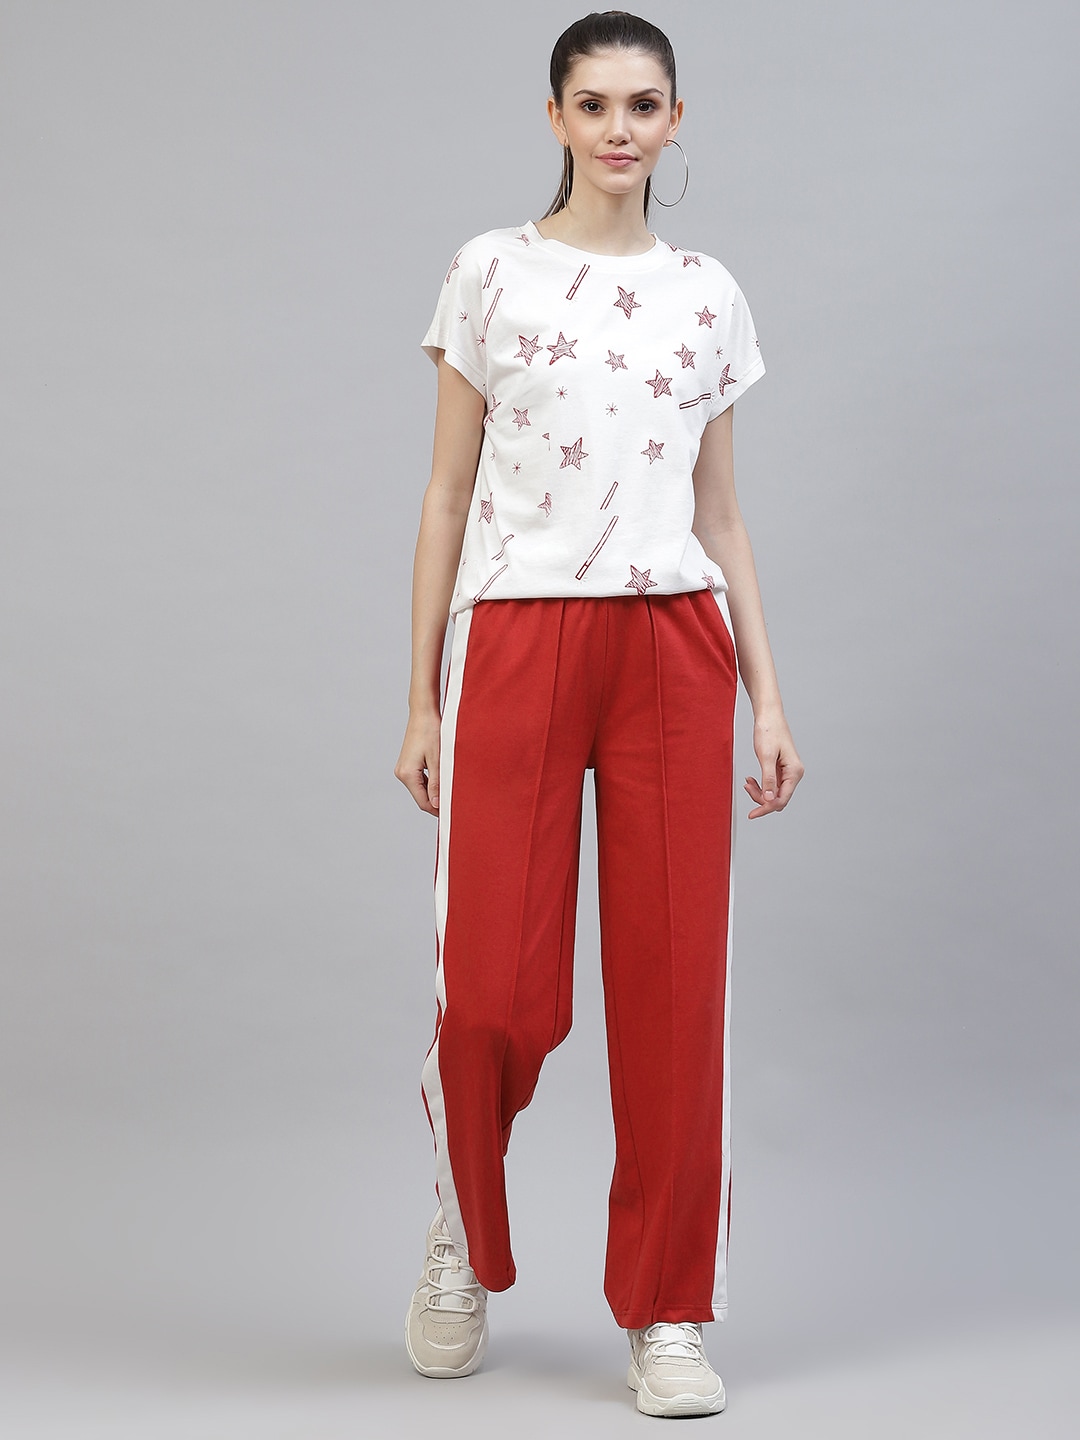 Laabha Women White and Red Conversational Printed Tracksuit Price in India